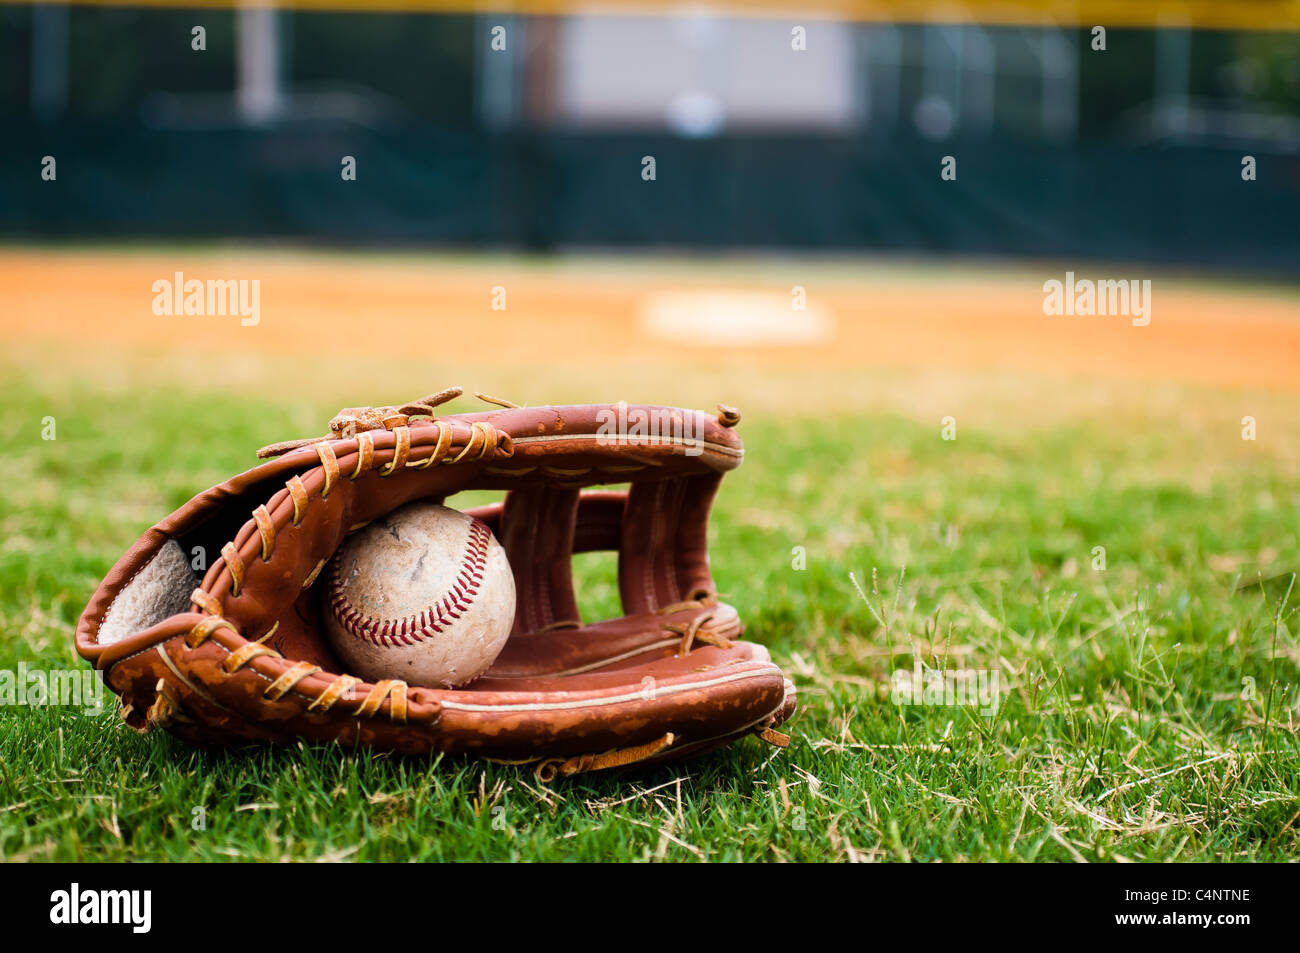 Baseball in glove on field with base and outfield in background. Stock Photo